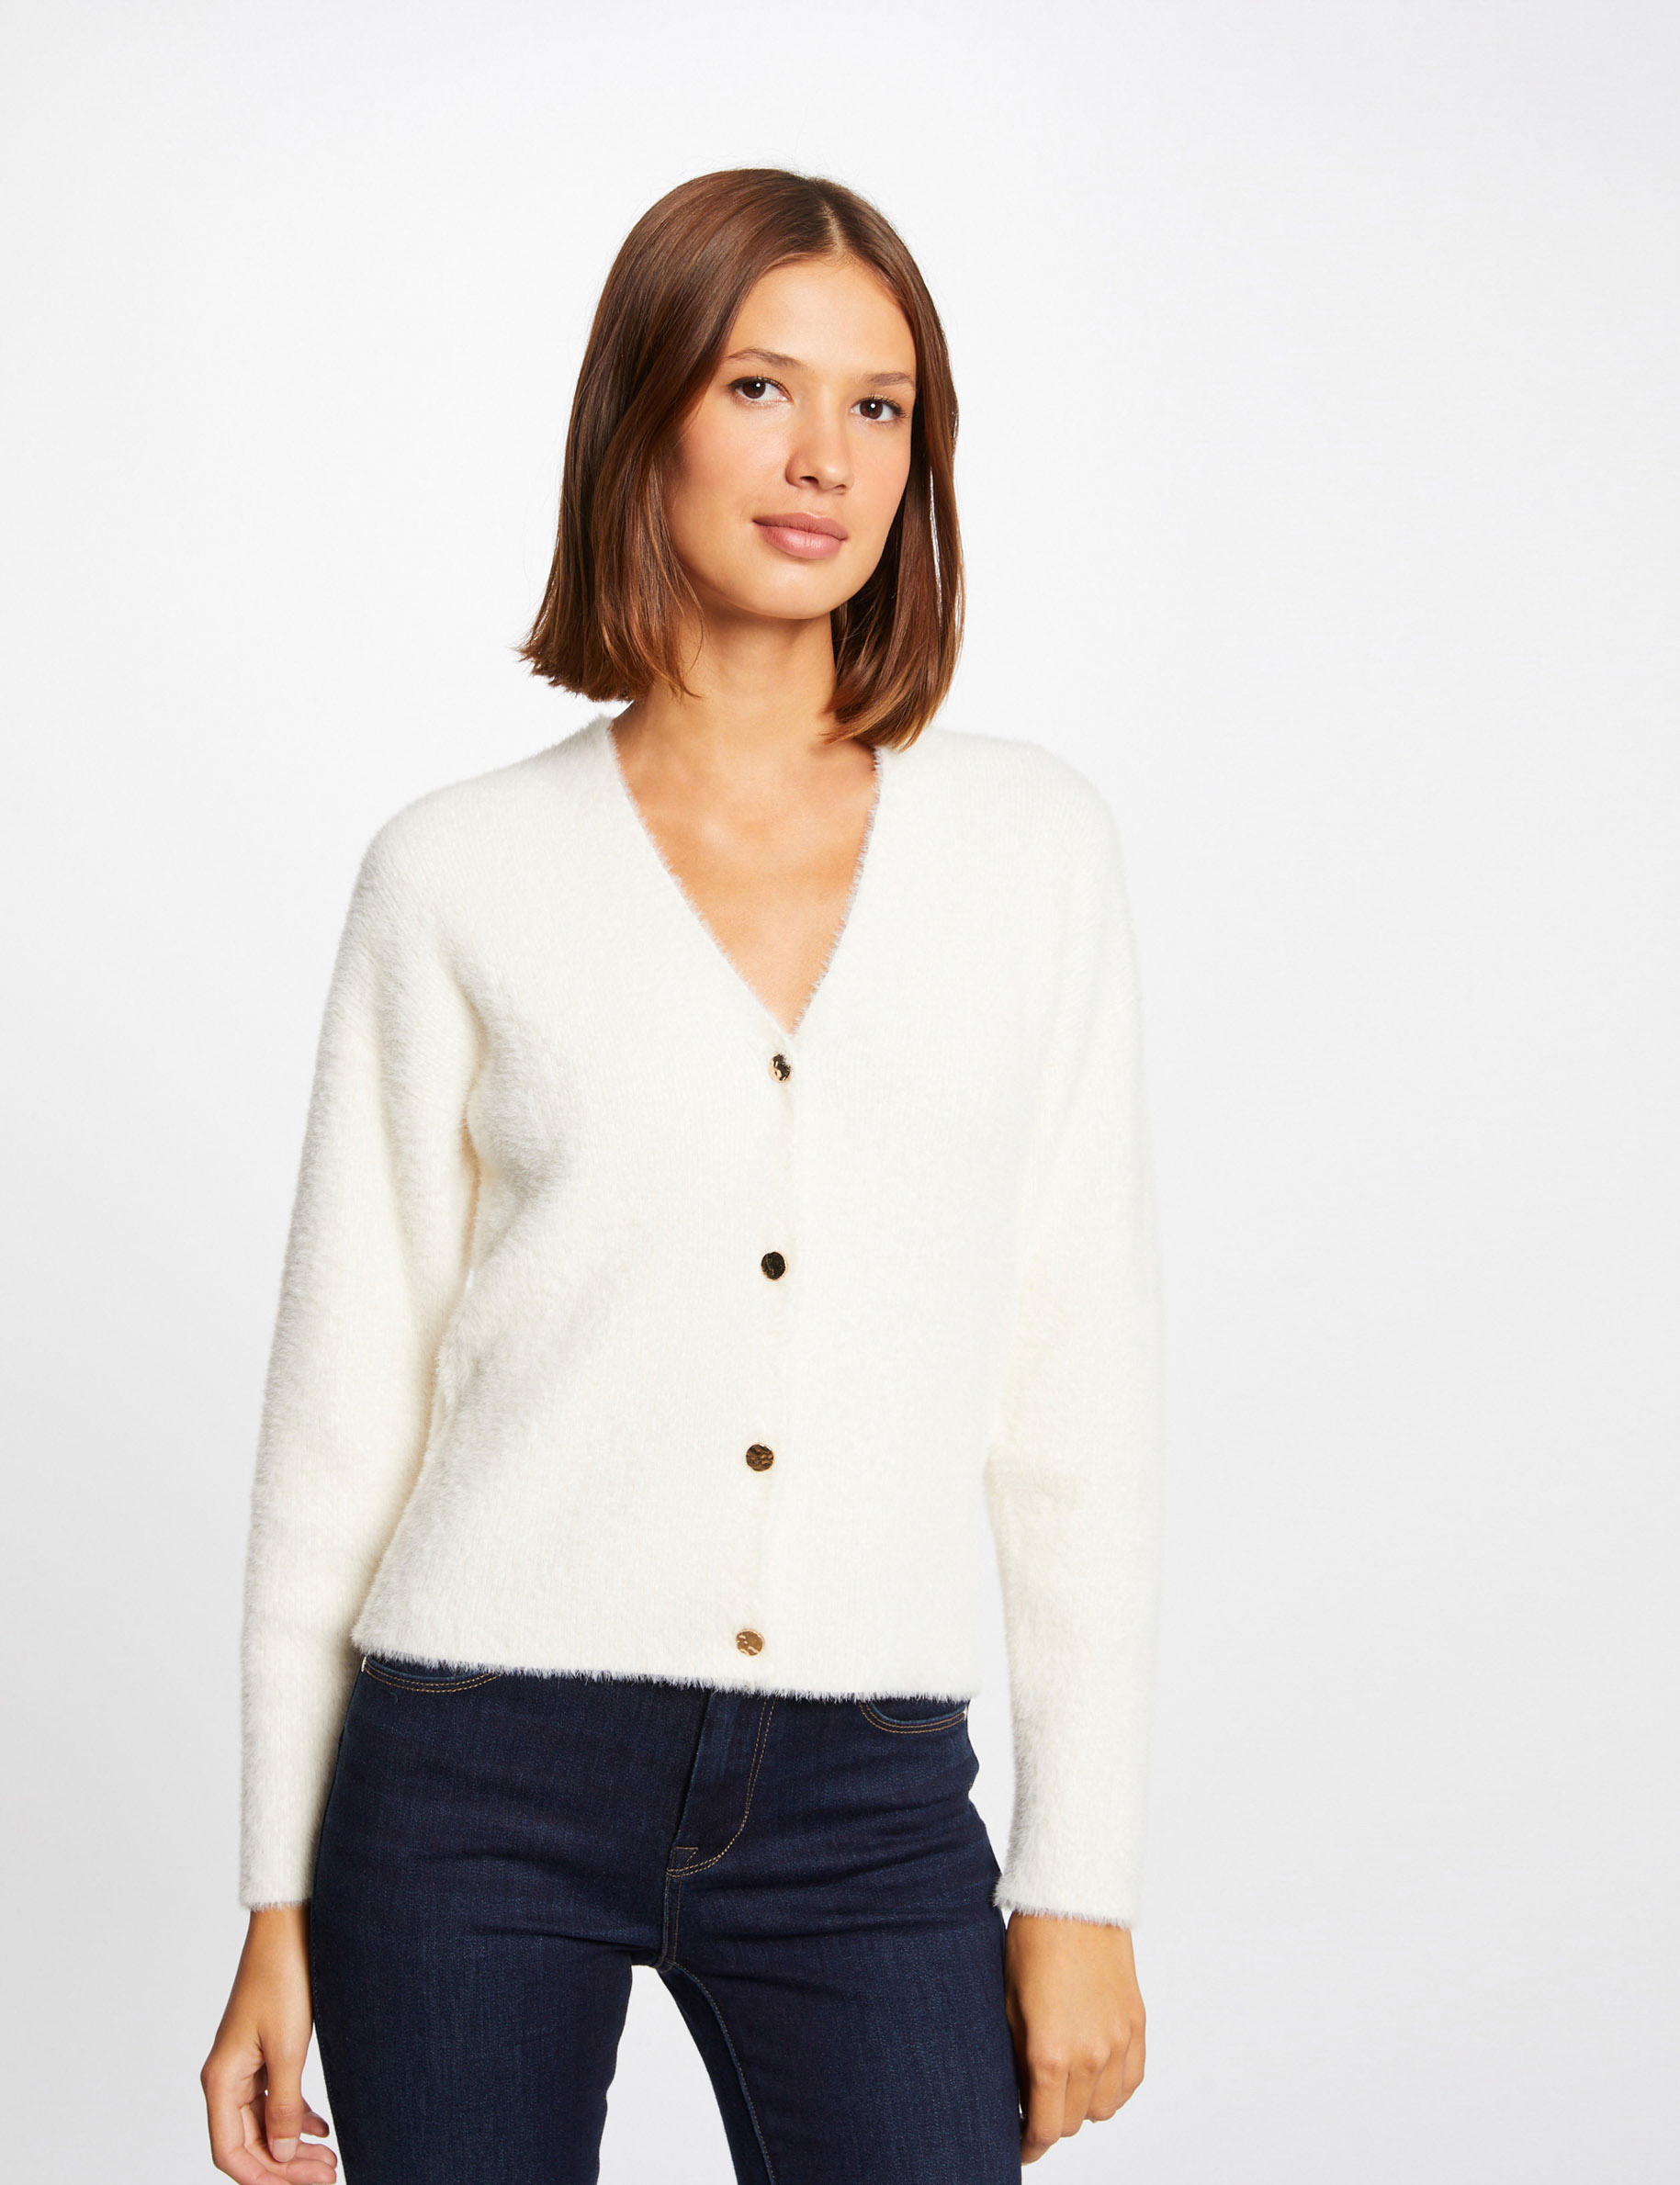 Long-sleeved cardigan with V-neck ivory ladies'